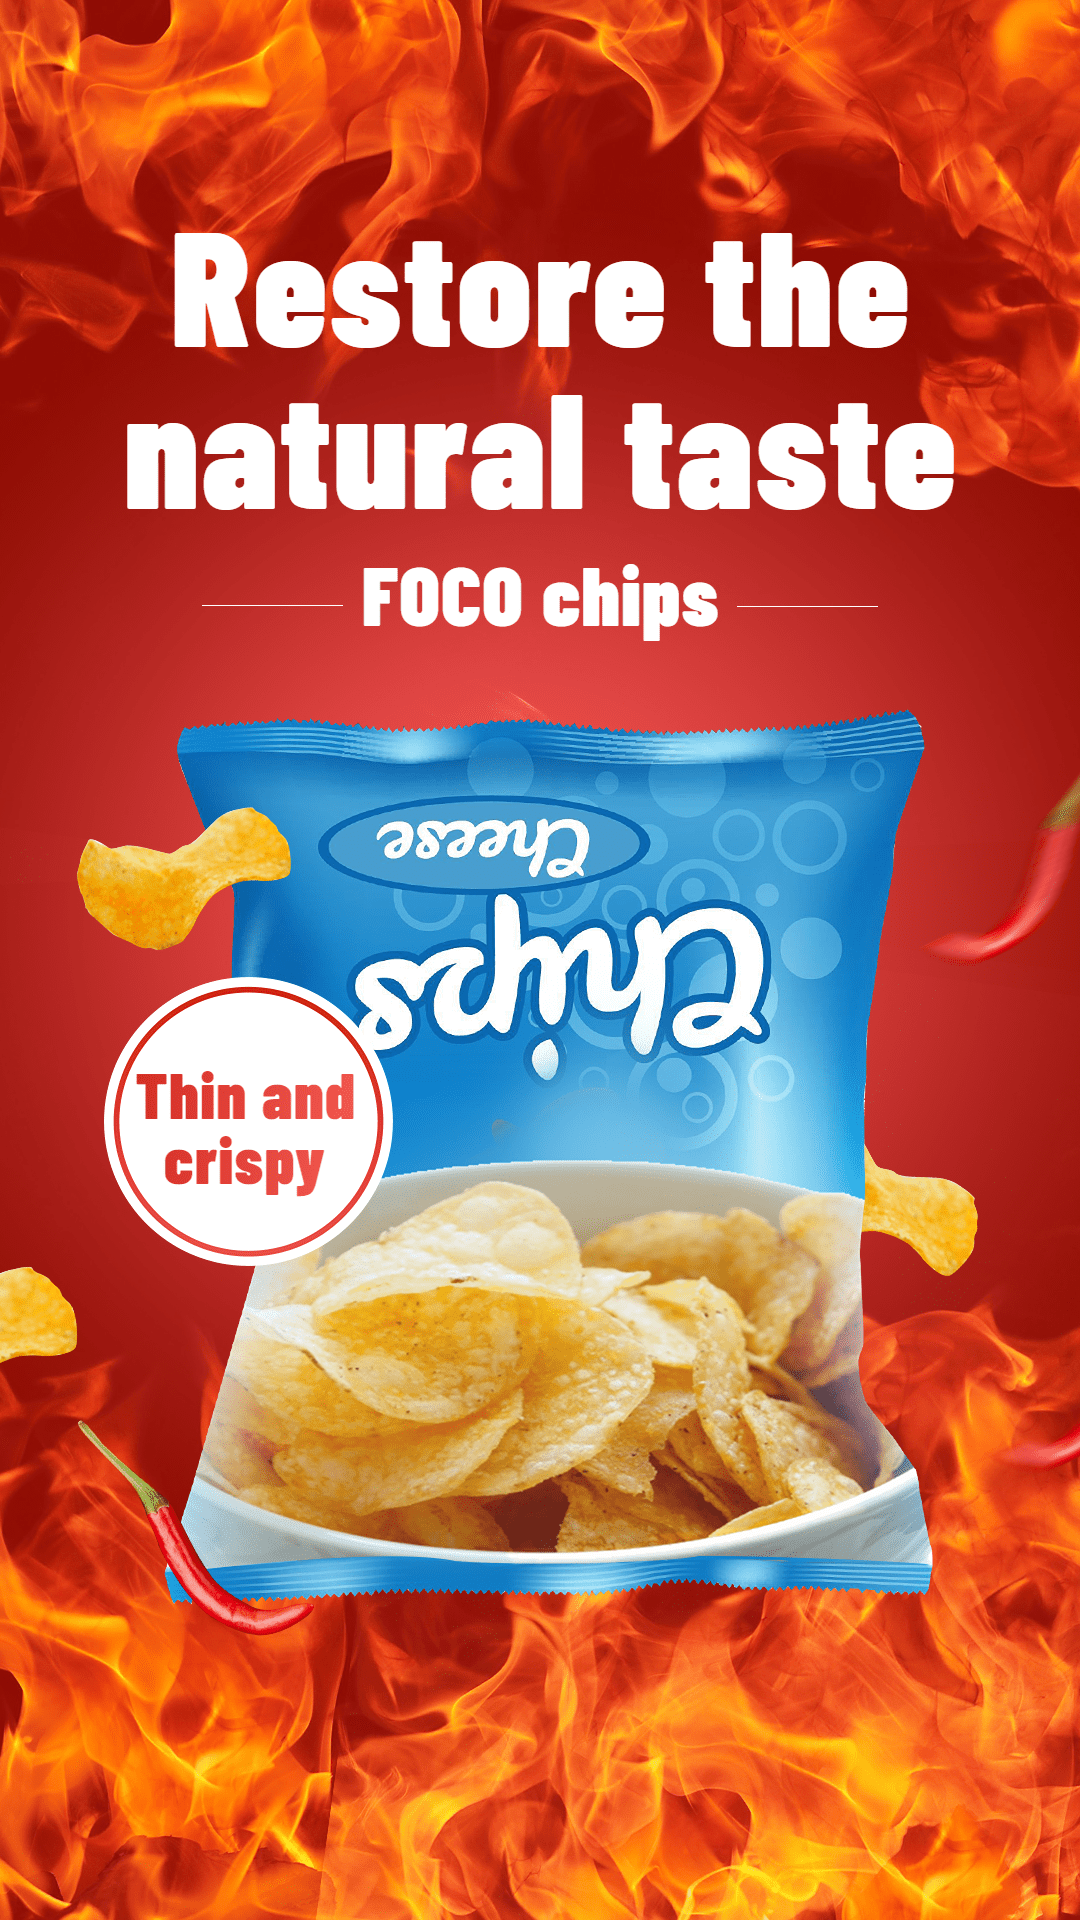 Flame Element Potato Chips Consumer Packaged Food Snacks Ecommerce Story预览效果